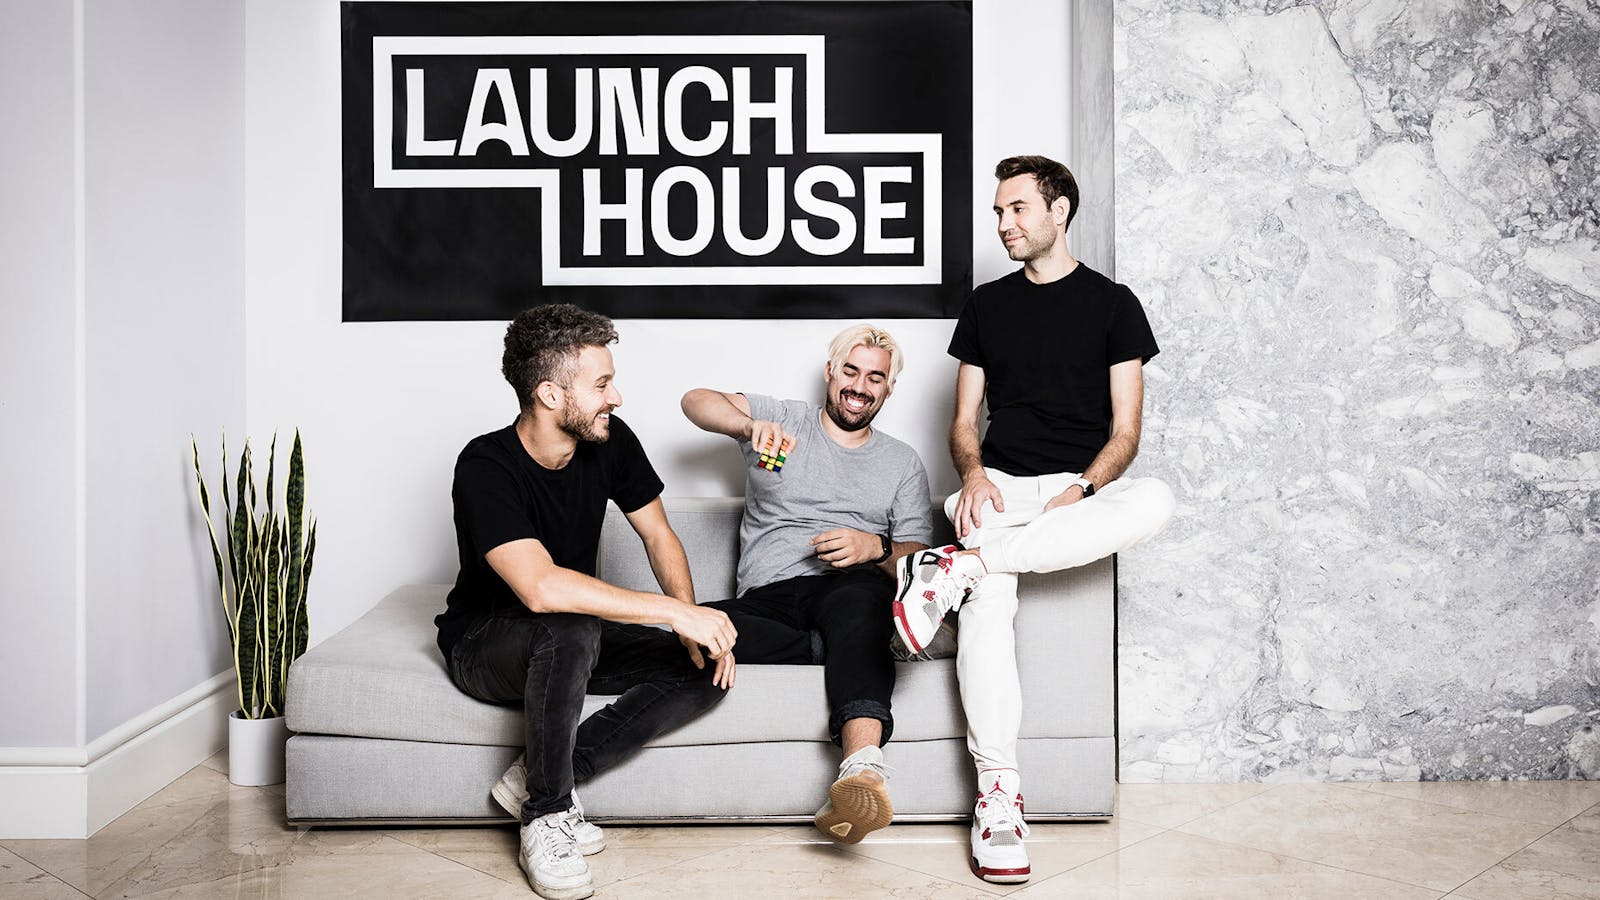 Launch House co-founders Brett Goldstein, Michael Houck and Jacob Peters (from left to right). Photo: Launch House